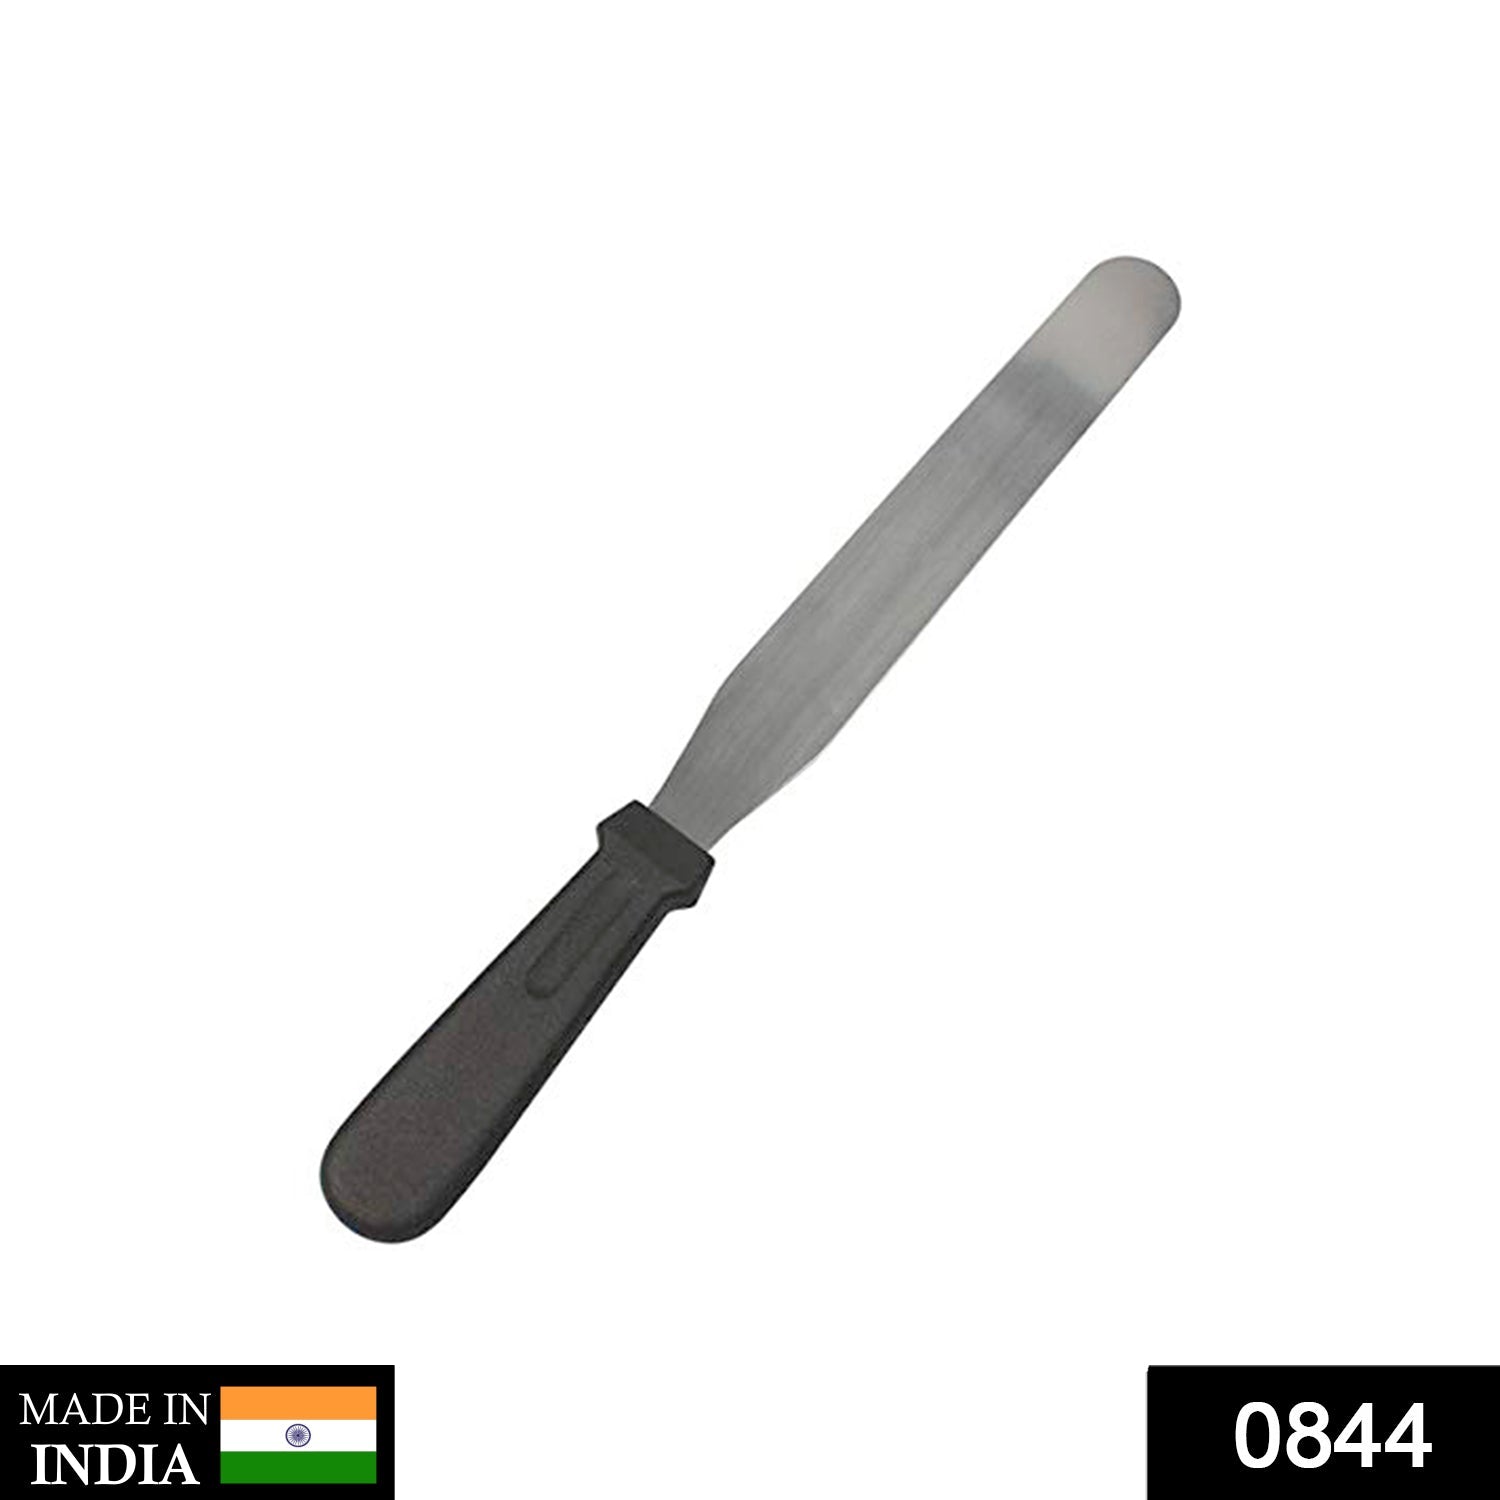 0844 Stainless Steel Palette Knife Offset Spatula for Spreading and Smoothing Icing Frosting of Cake 12 Inch Dukandaily